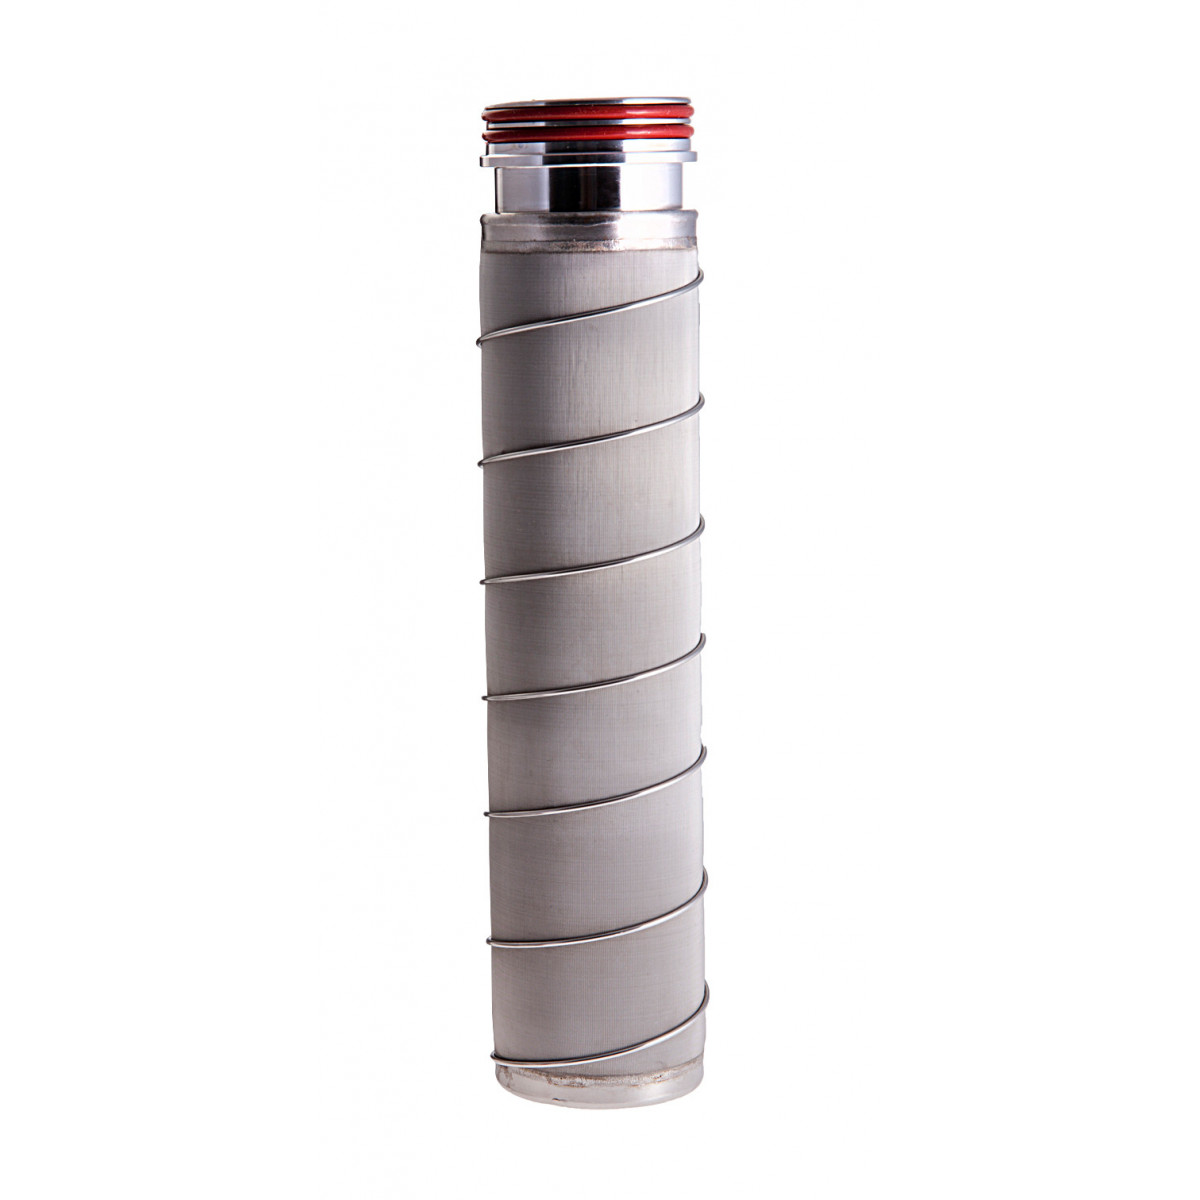 Filter cartridge stainless steel oil 5 micron for Enolmatic